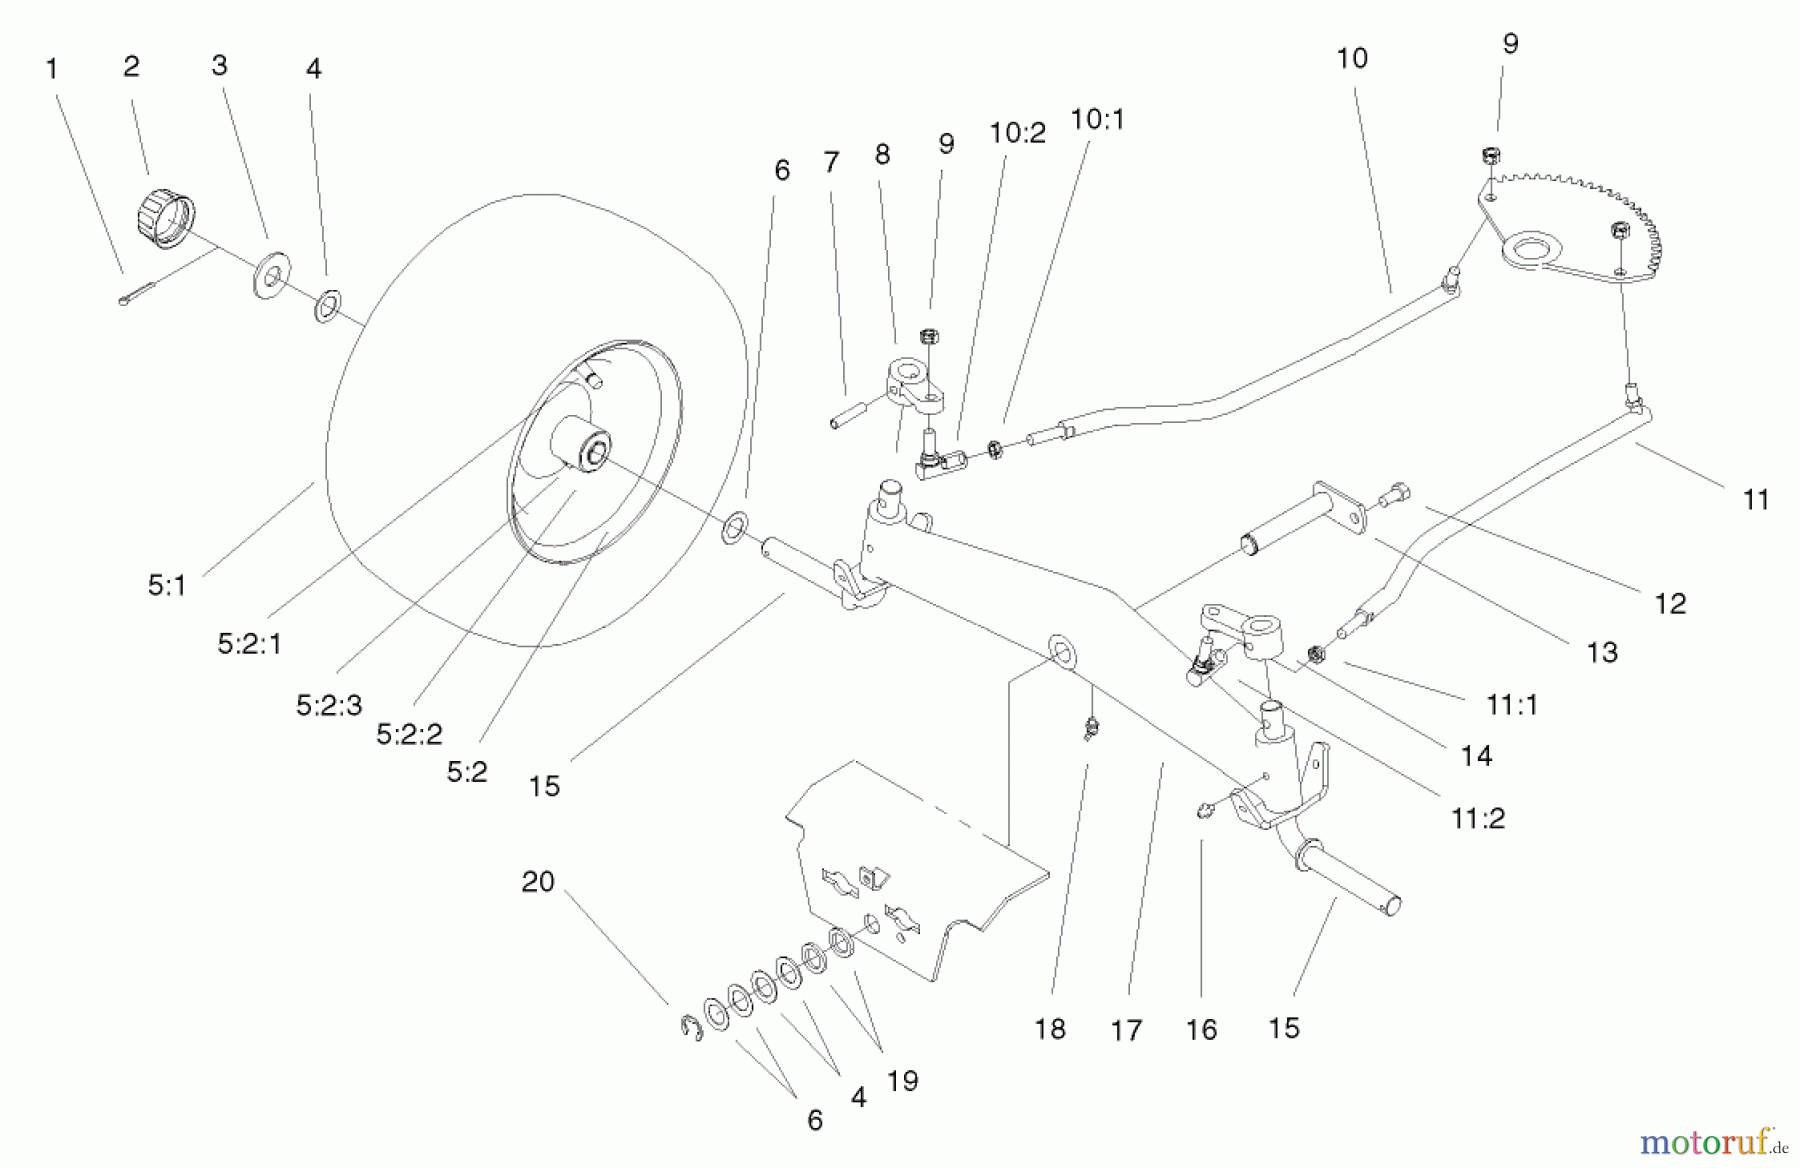  Toro Neu Mowers, Lawn & Garden Tractor Seite 1 72071 (265-H) - Toro 265-H Lawn and Garden Tractor, 2000 (200000001-200999999) FRONT AXLE ASSEMBLY